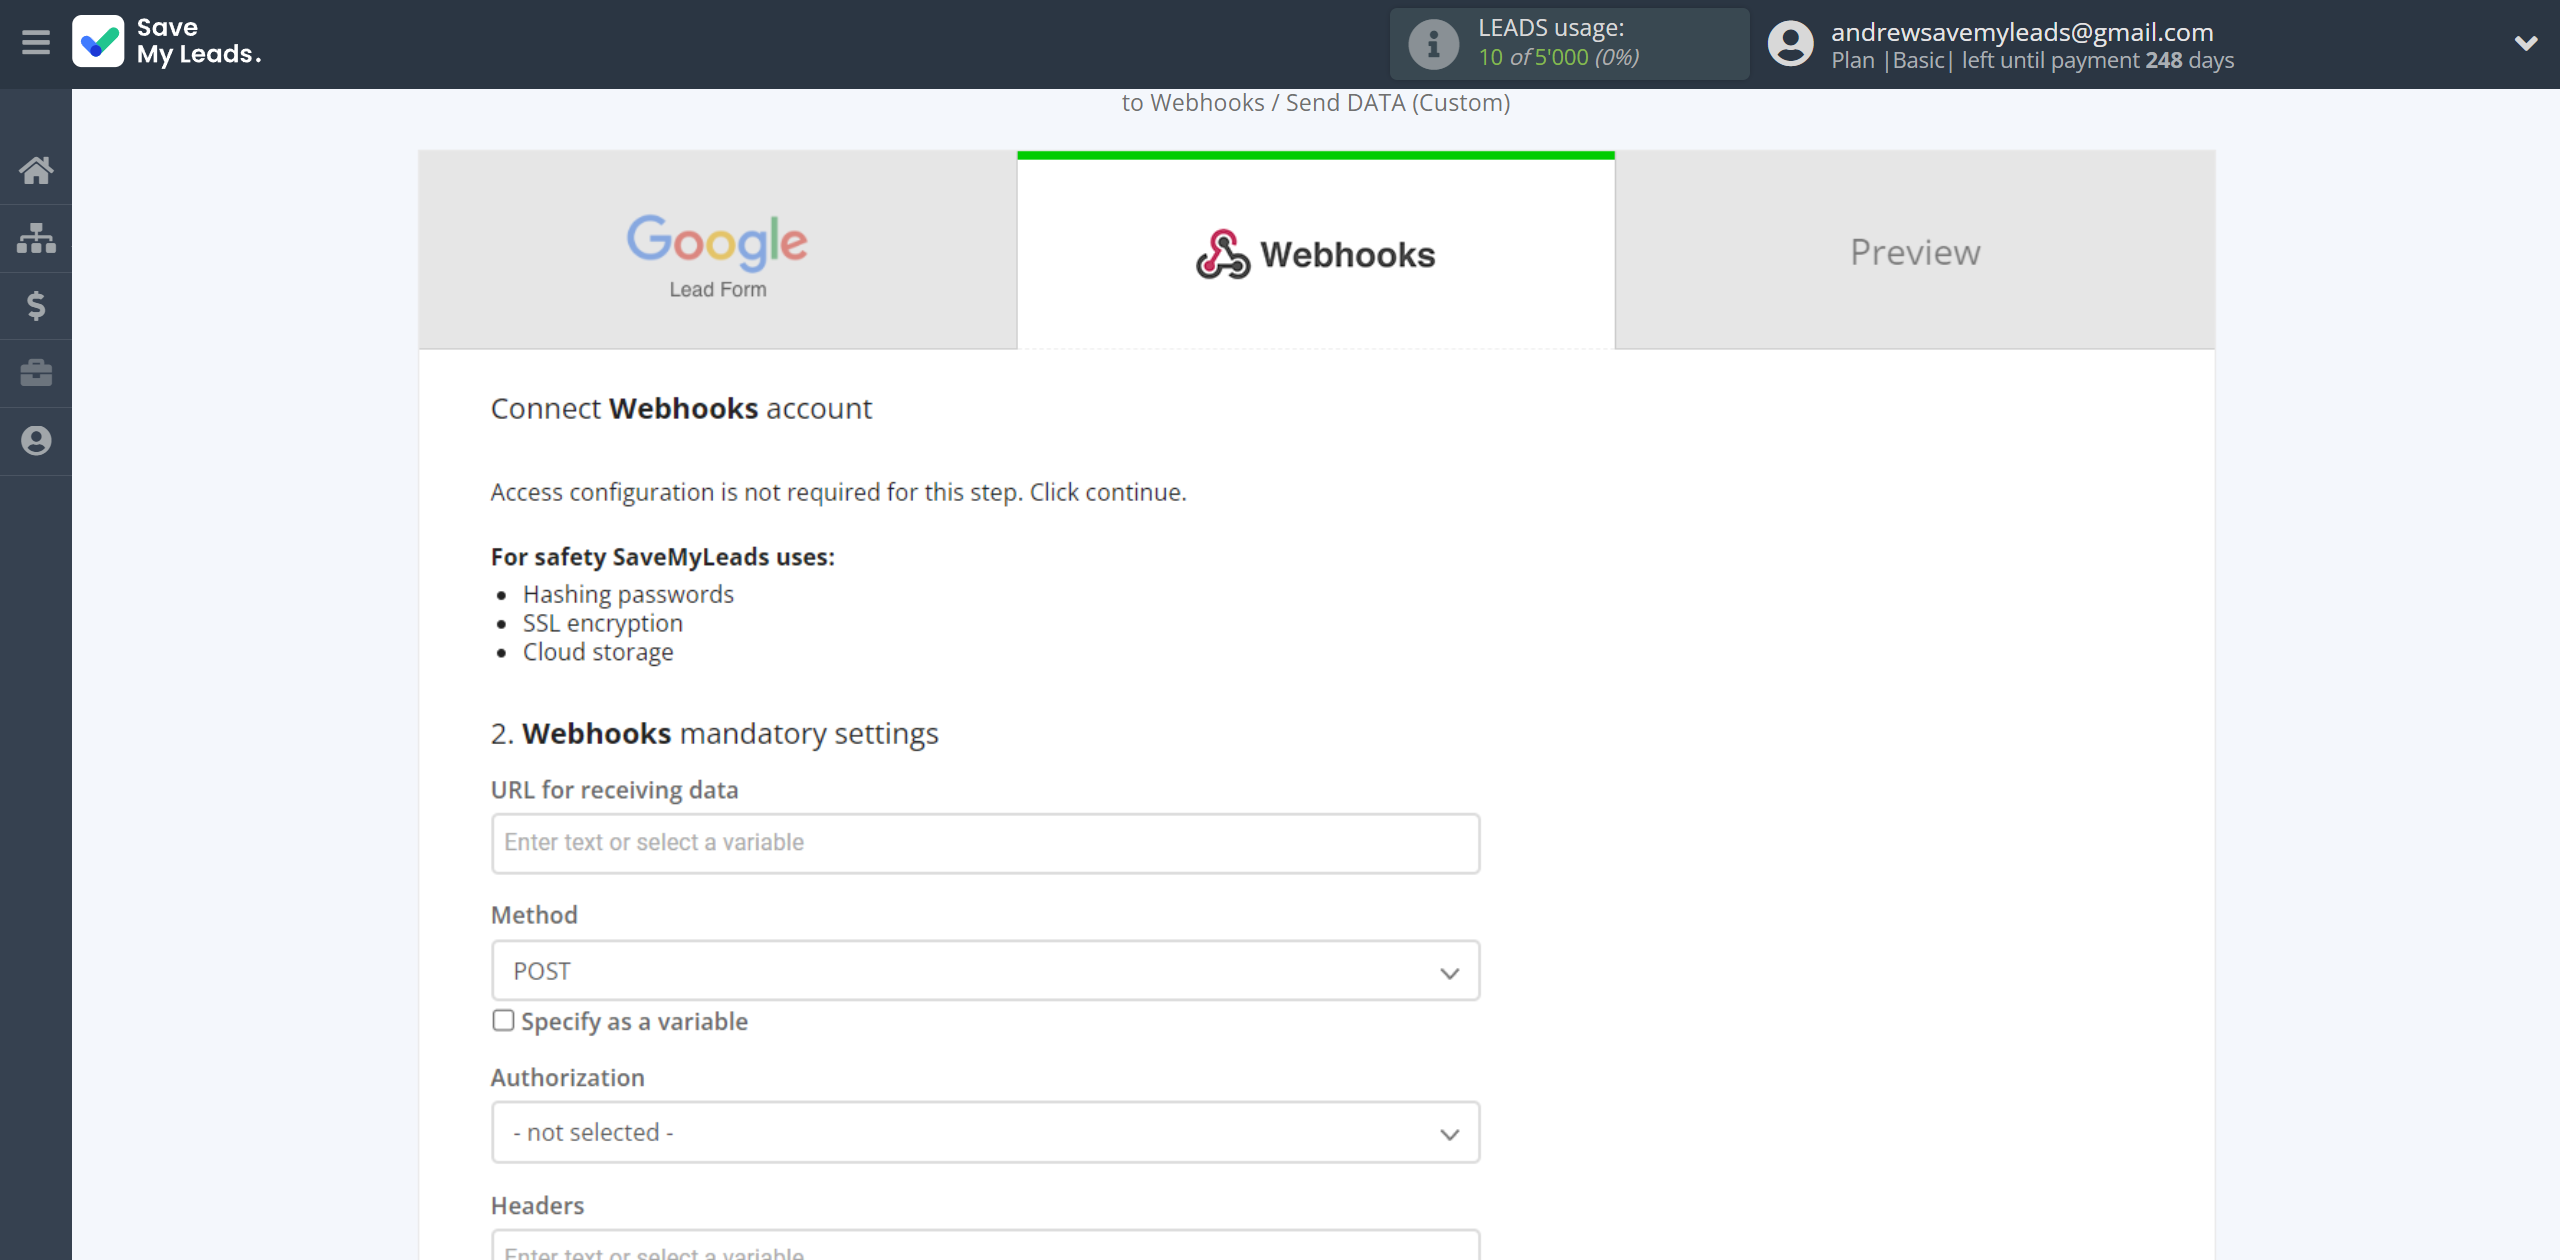 How to Connect Google Lead Form with Webhooks (Custom) | Data Destination account selection